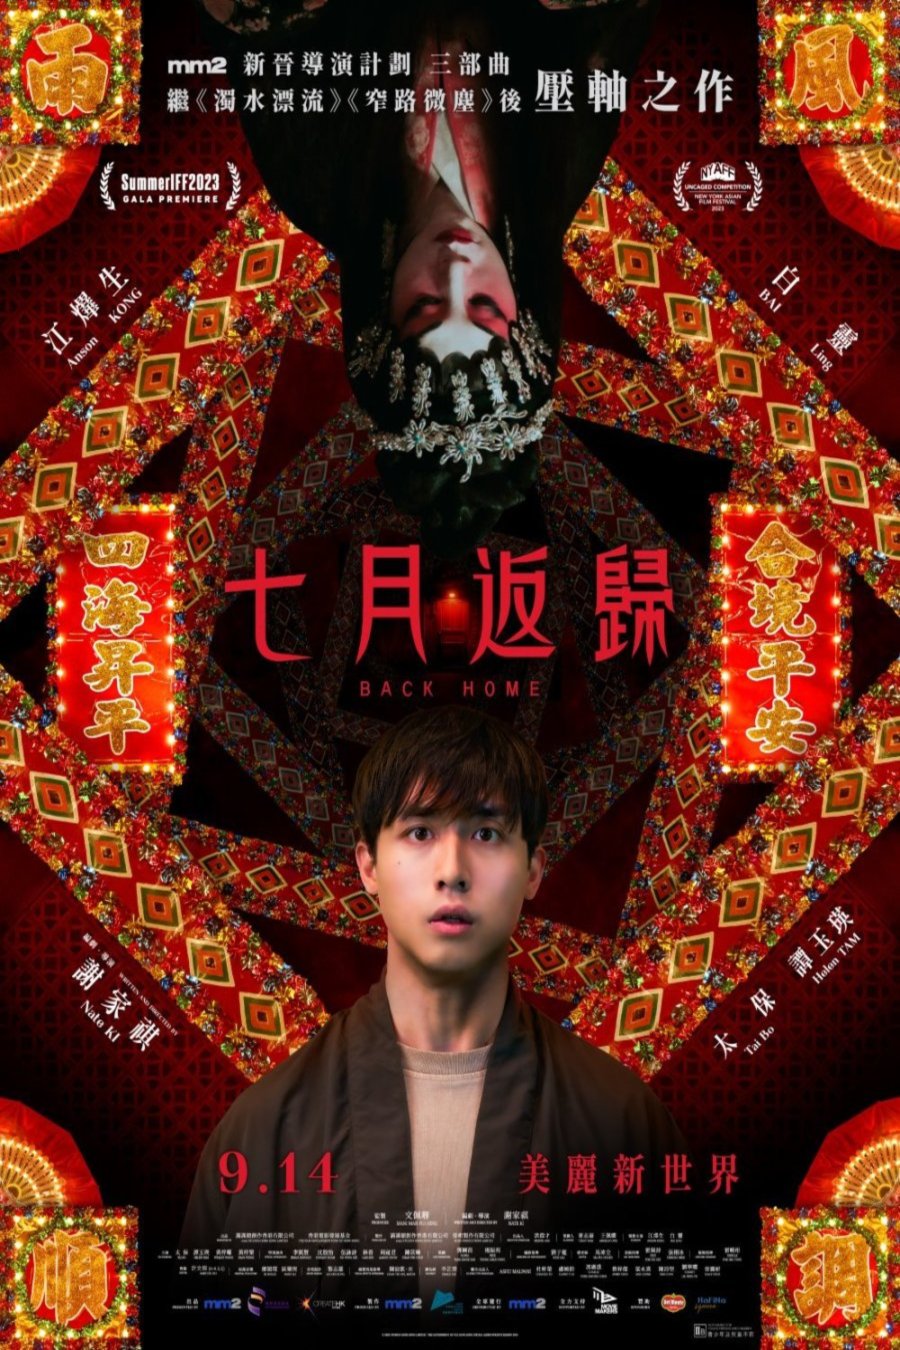 Cantonese poster of the movie Qi yue fan gui